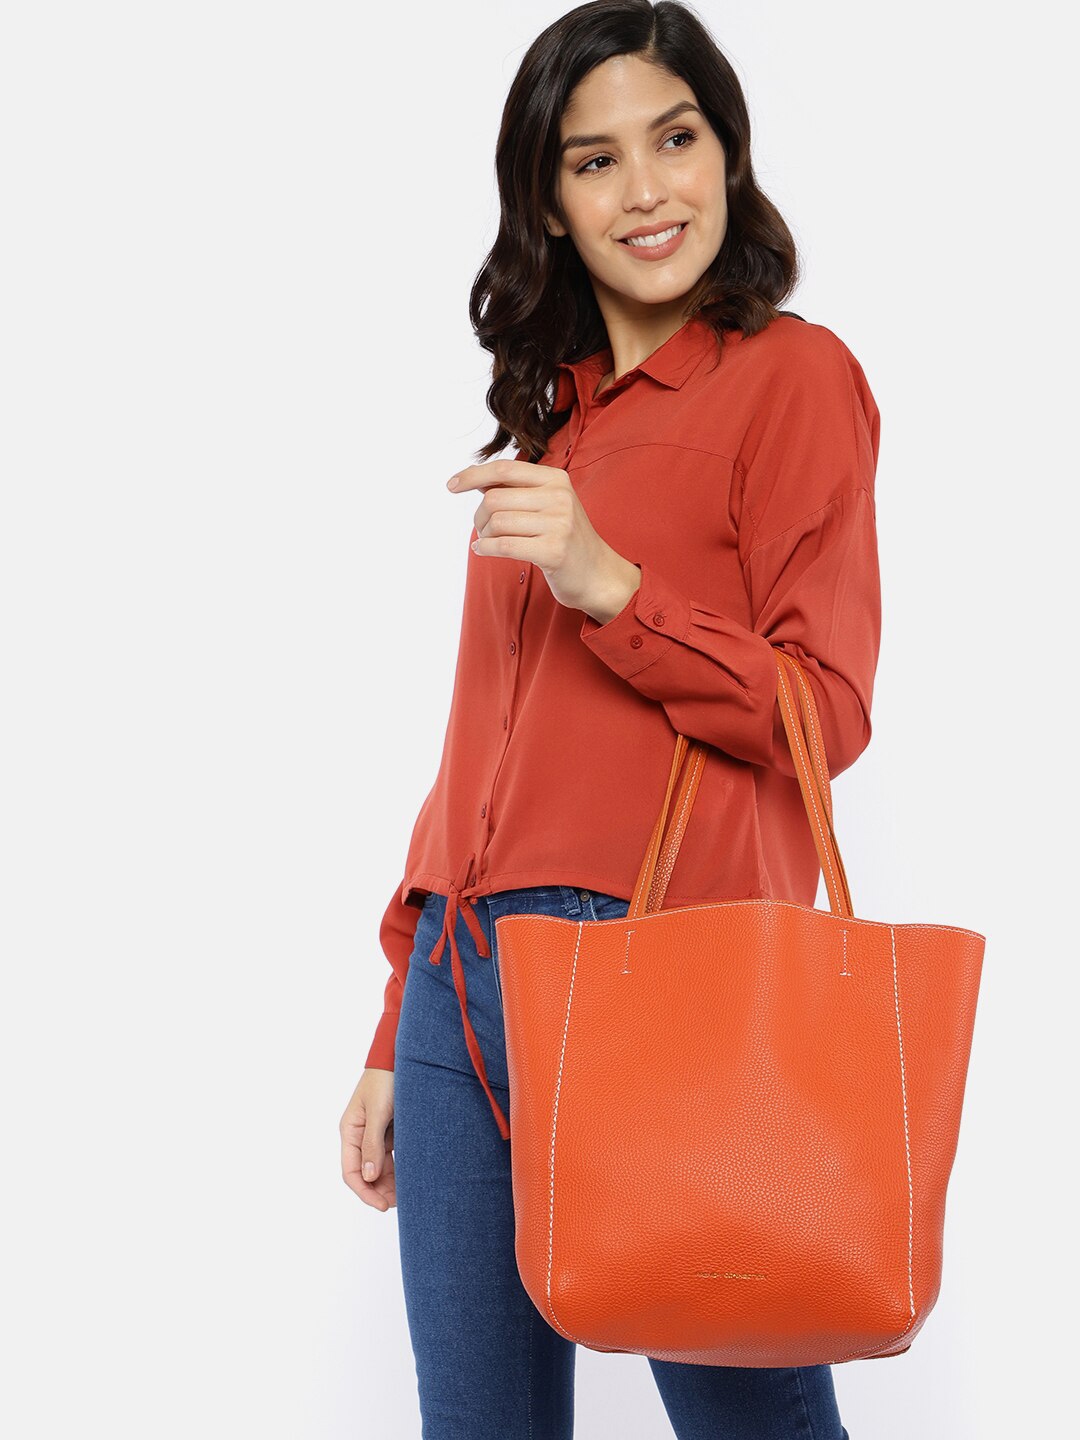 Buy French Connection Orange Solid Tote Bag - Handbags for Women ...